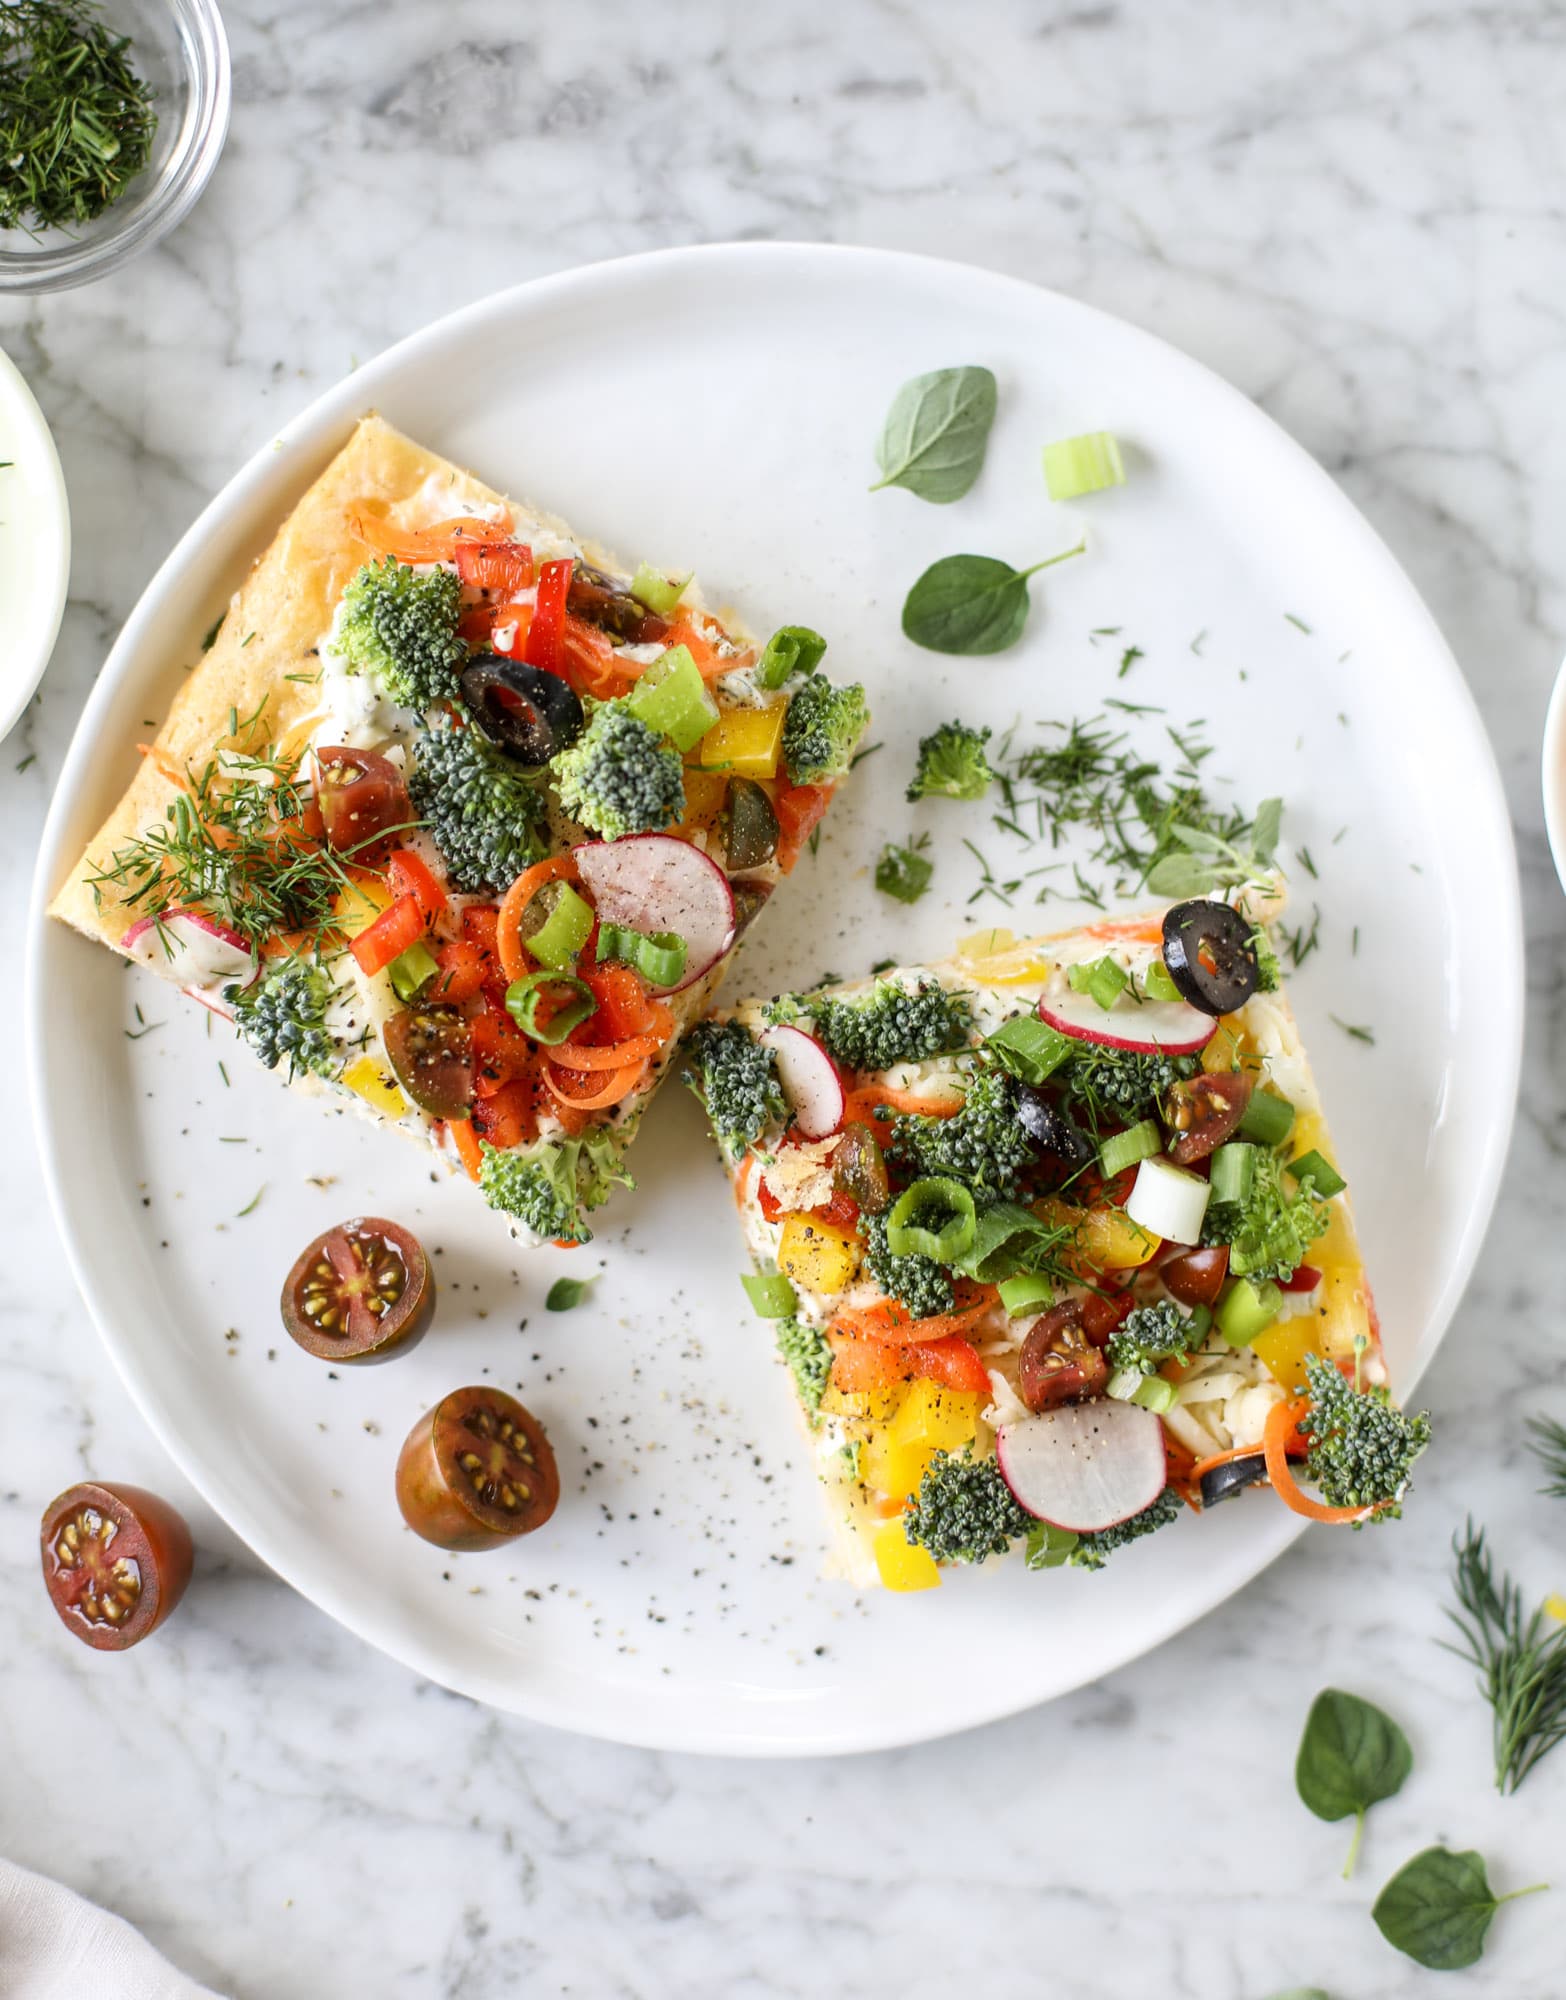 My mom's classic appetizer, the old school veggie pizza, is perfect for summer parties both indoor and out! A flaky pastry crust, a flavorful mascarpone greek yogurt base and tons of fresh chopped vegetables on top. It's a winning combination! I howsweeteats.com #veggie #pizza #appetizer #summer #crescentrolls #greekyogurt